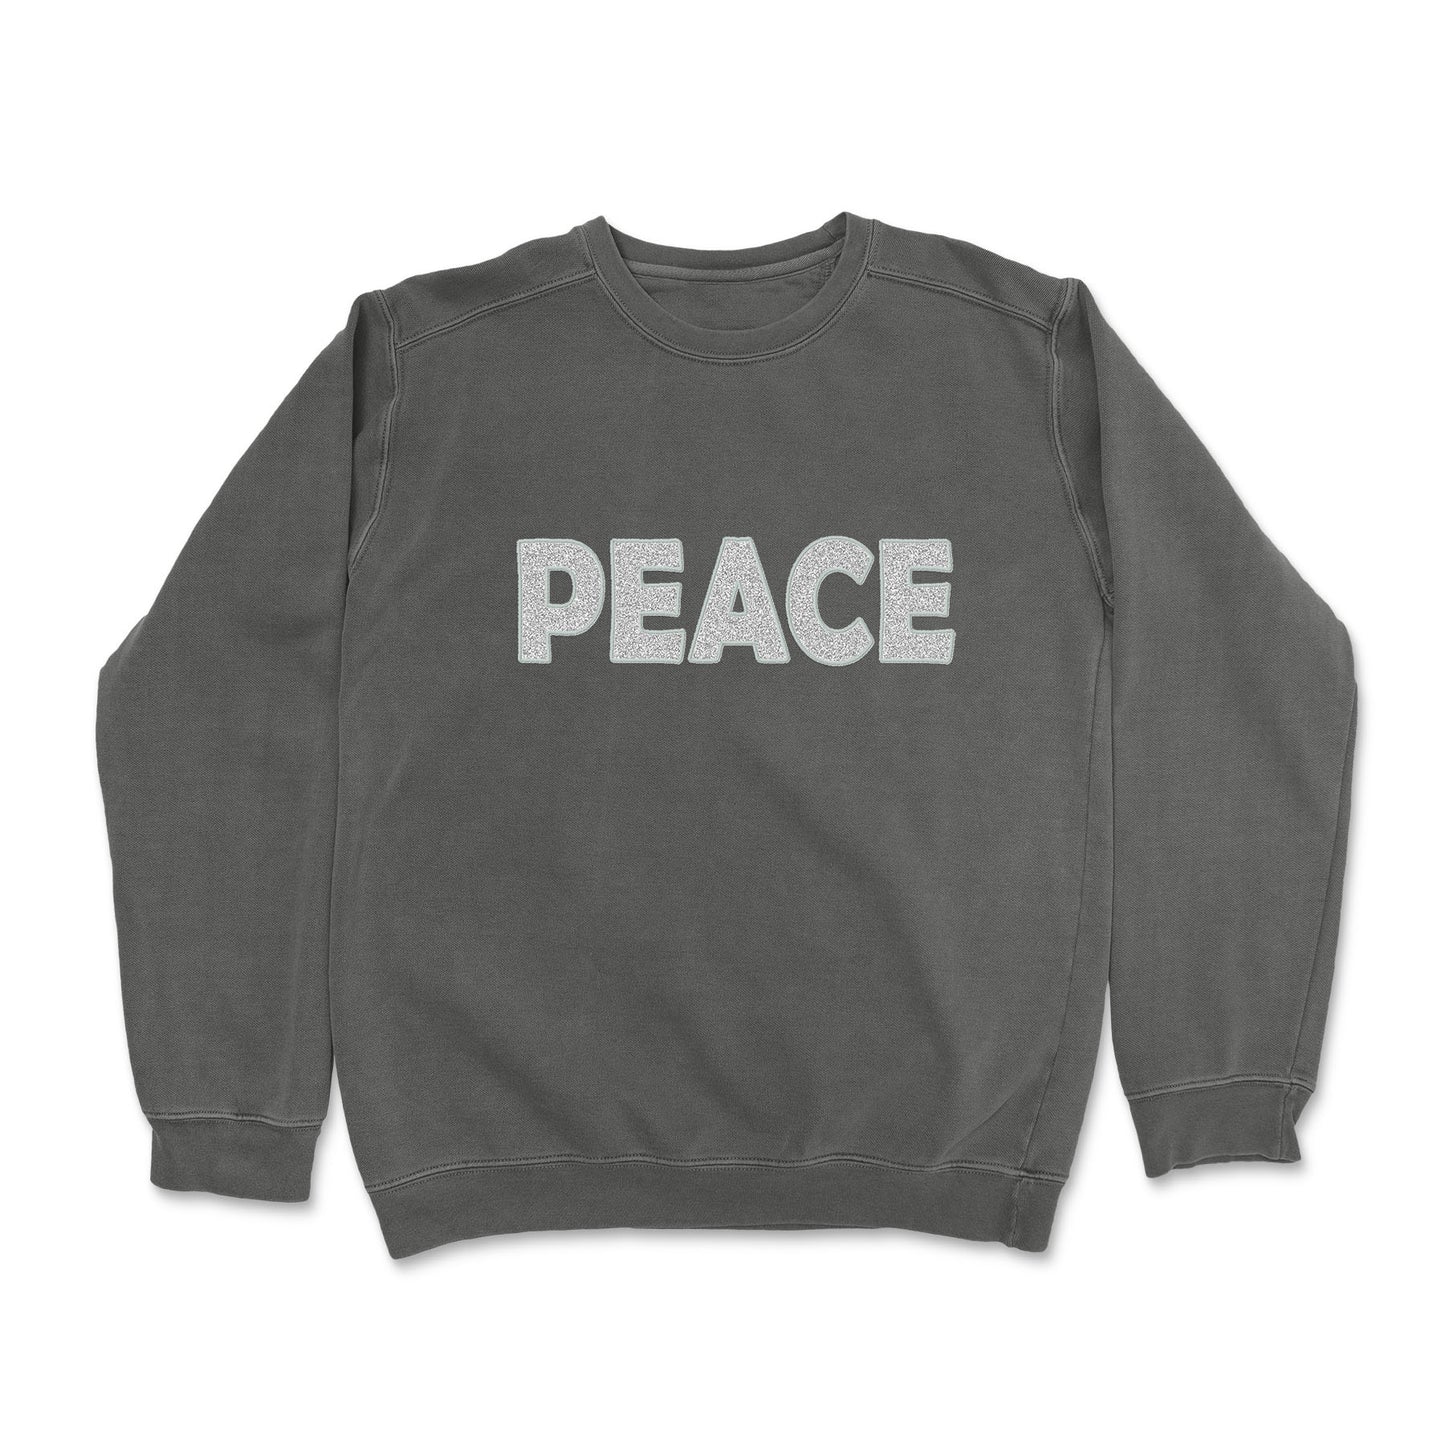 Believe and Peace GLITTER Applique Embroidered Garment Dyed Custom Sweatshirt